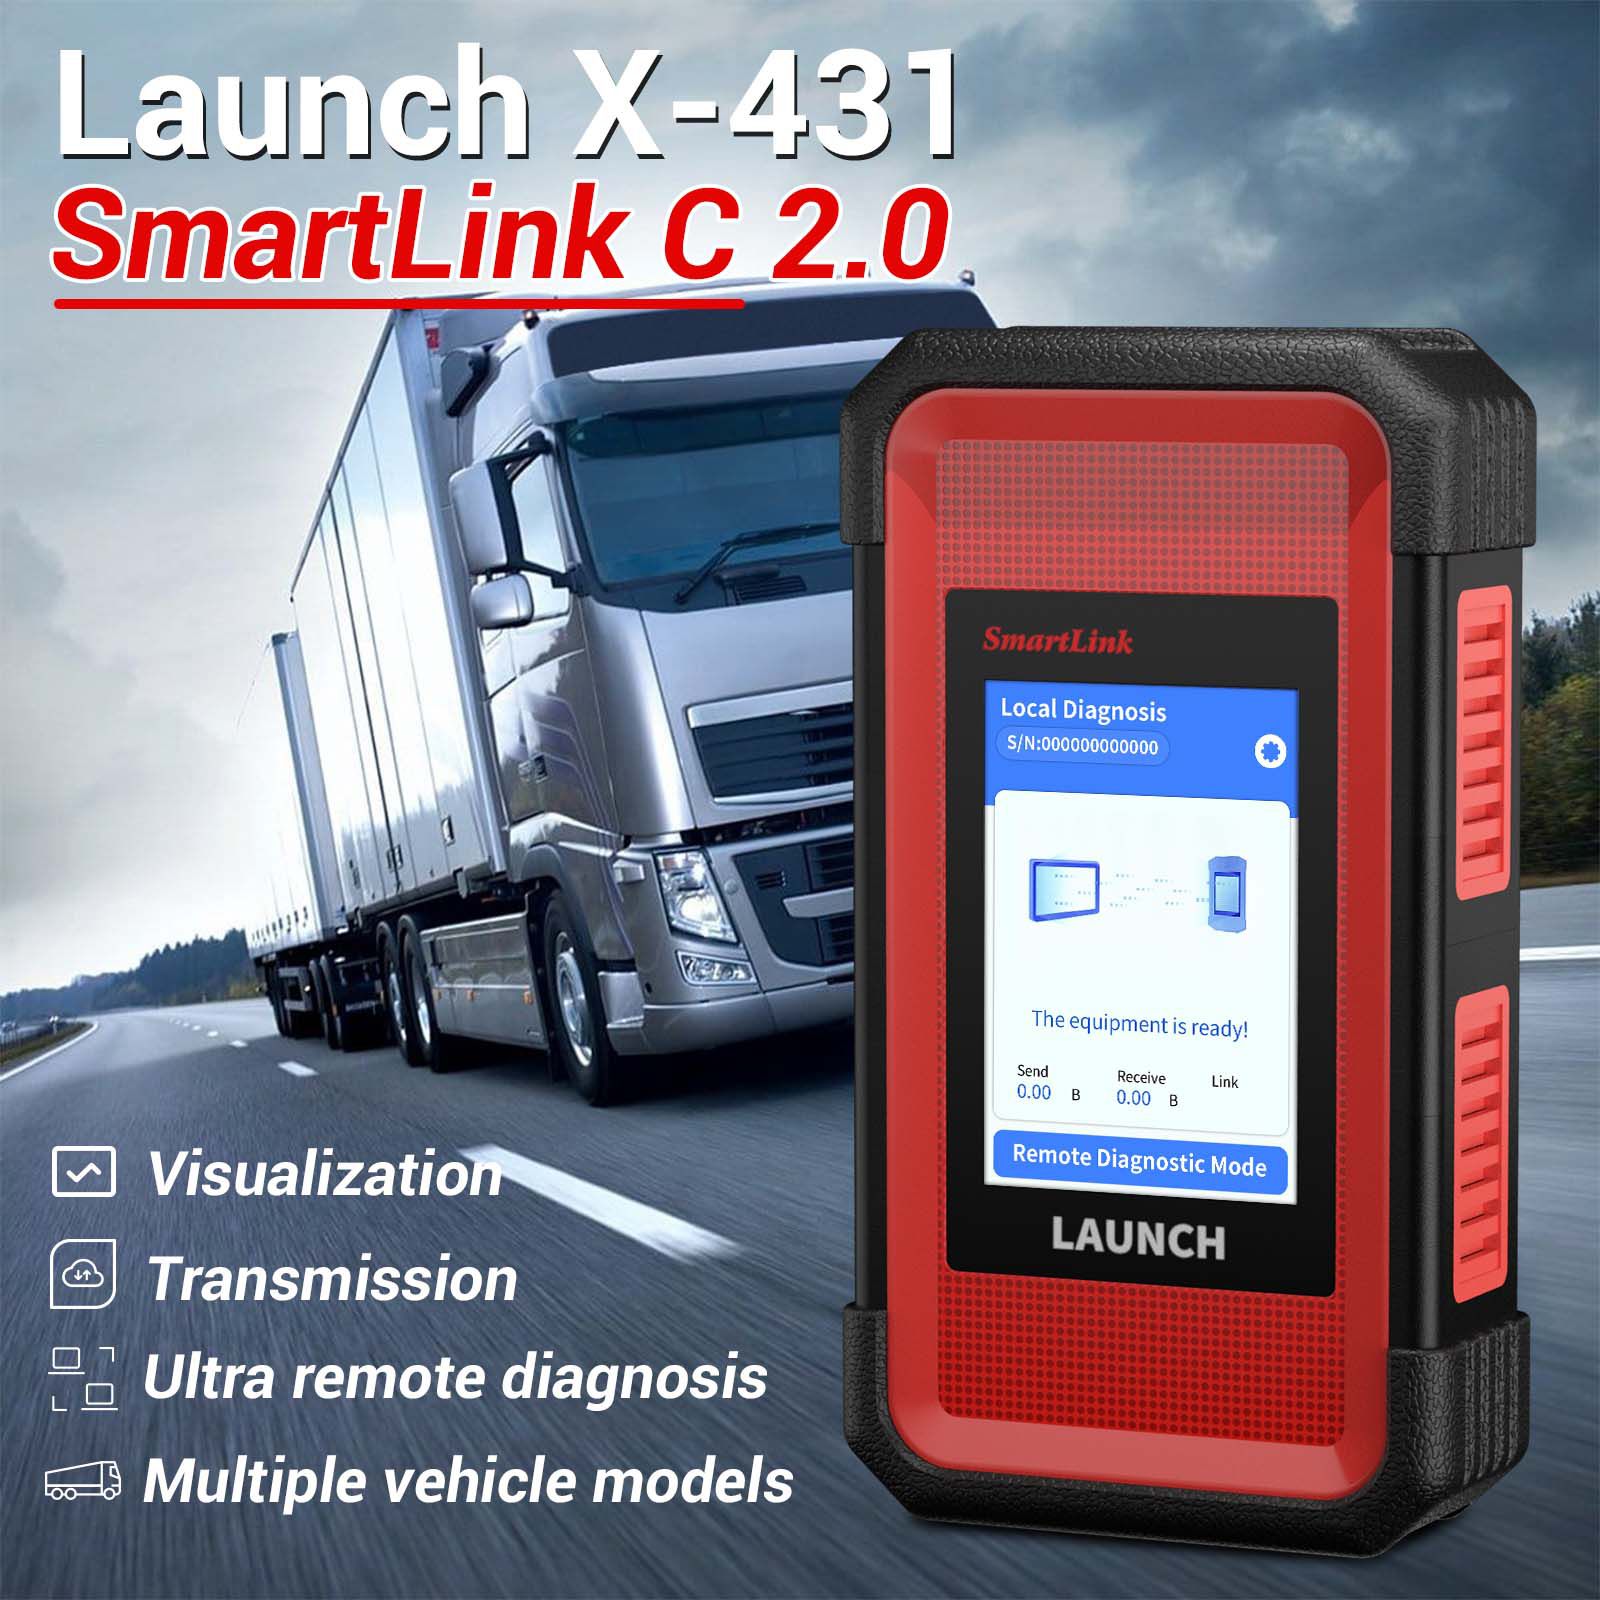 Launch X431 V+ 4.0 10.1inch Tablet with X-431 SmartLink C 2.0 Heavy-duty Truck Module for Commercial Vehicles/ Passenger/ New Energy Car